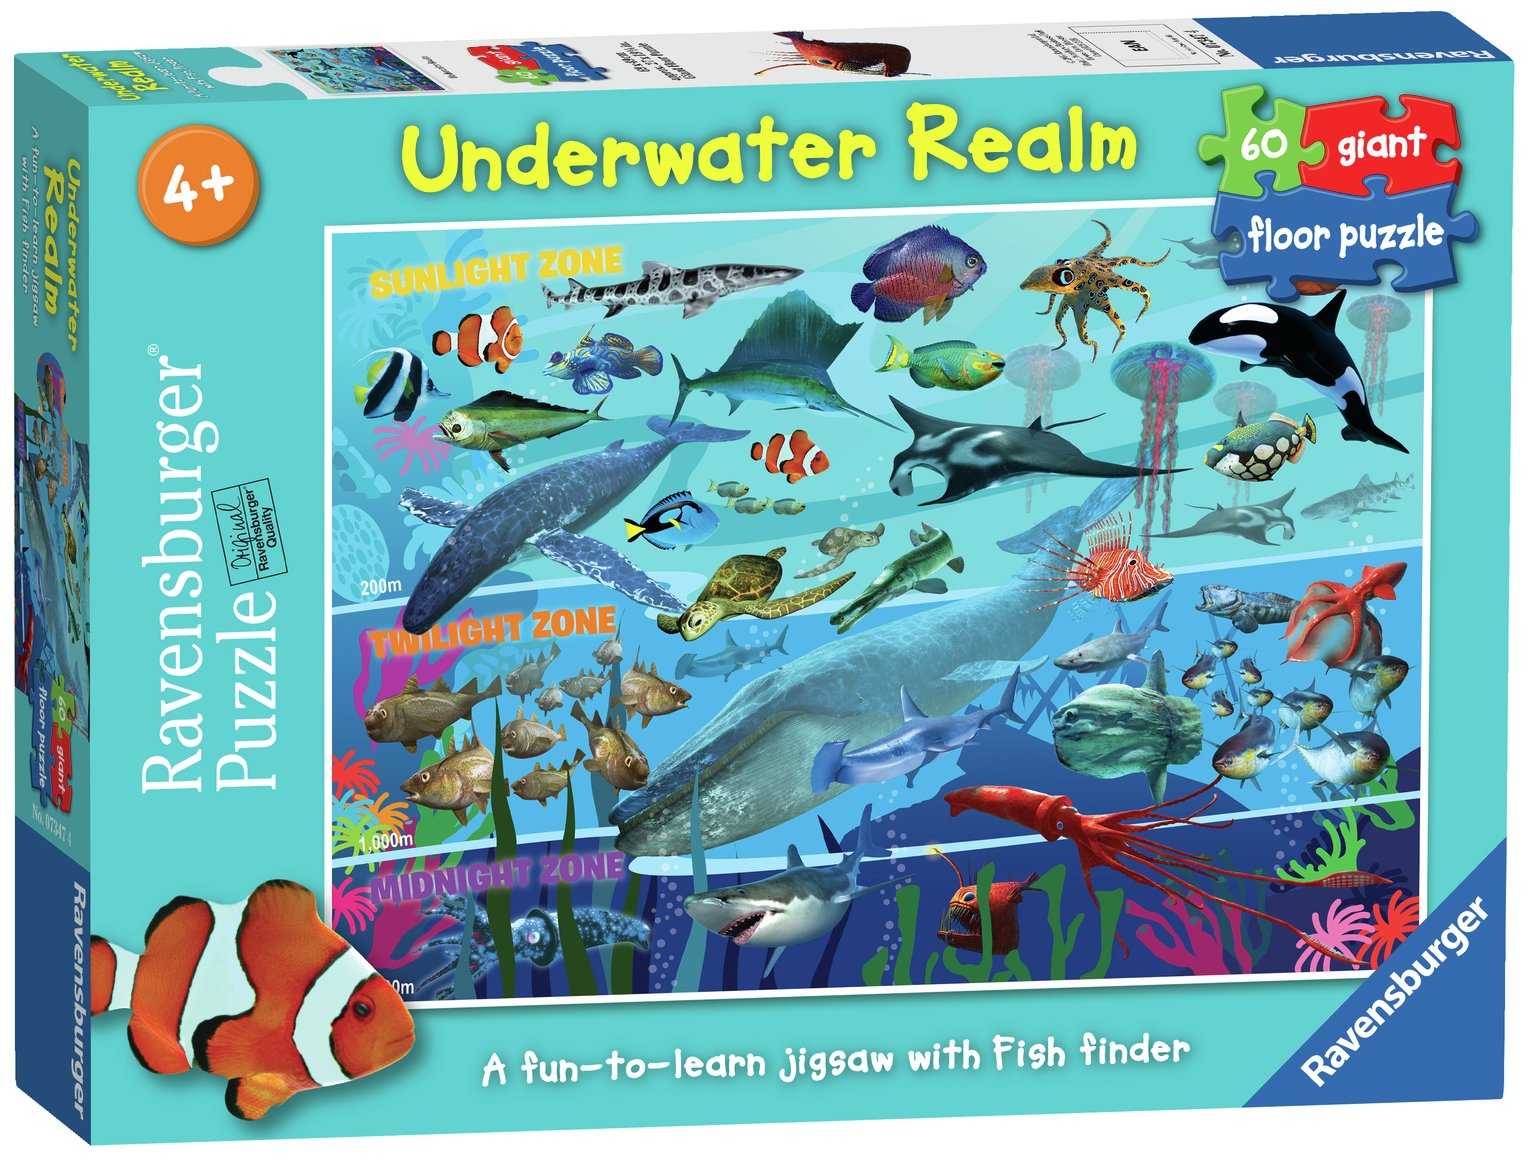 Underwater Realm 60 Piece Giant Floor Puzzle Review